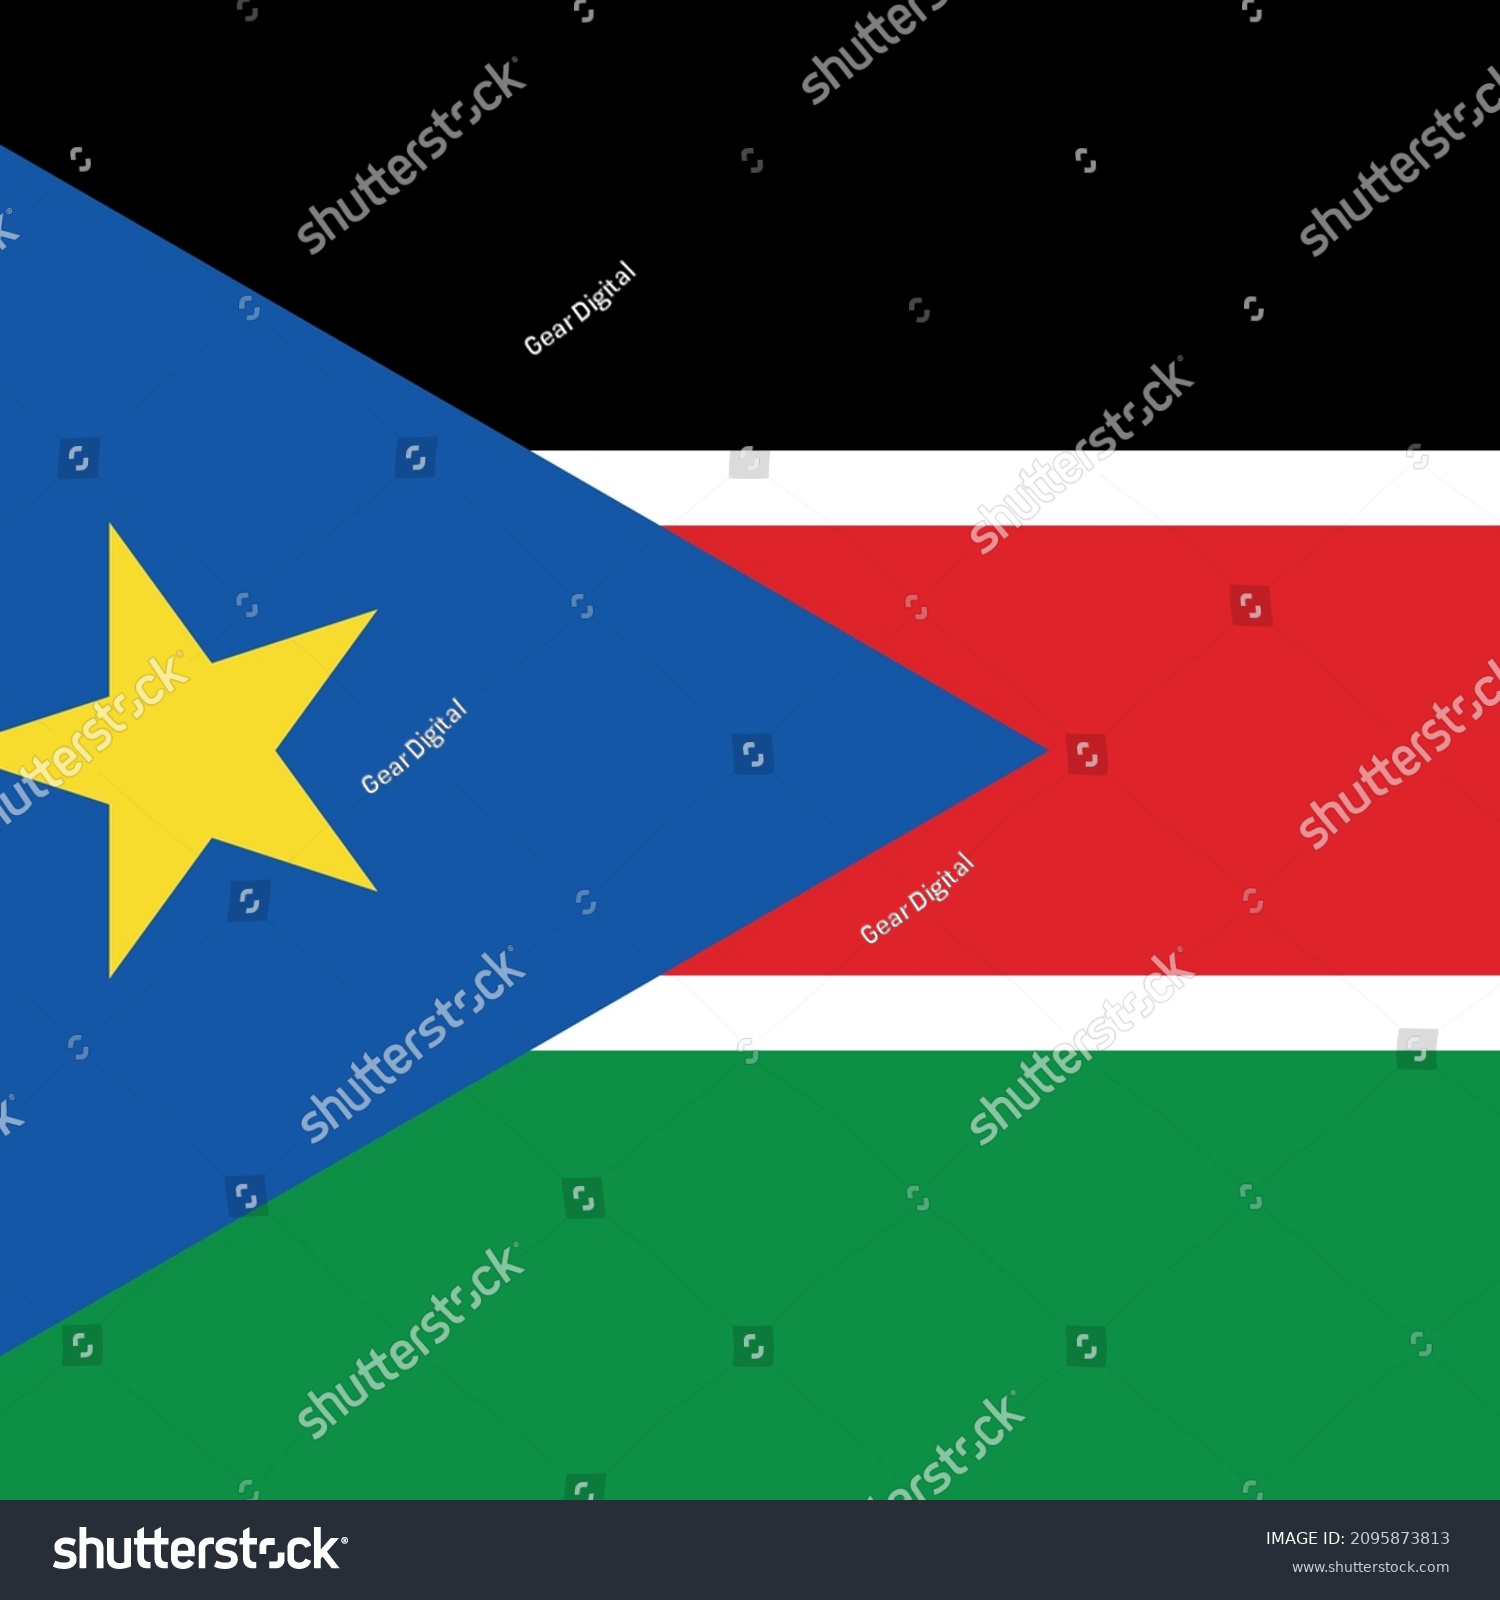 Square Flag Vector of South Sudan, Africa, Isolated on White Background. #2095873813